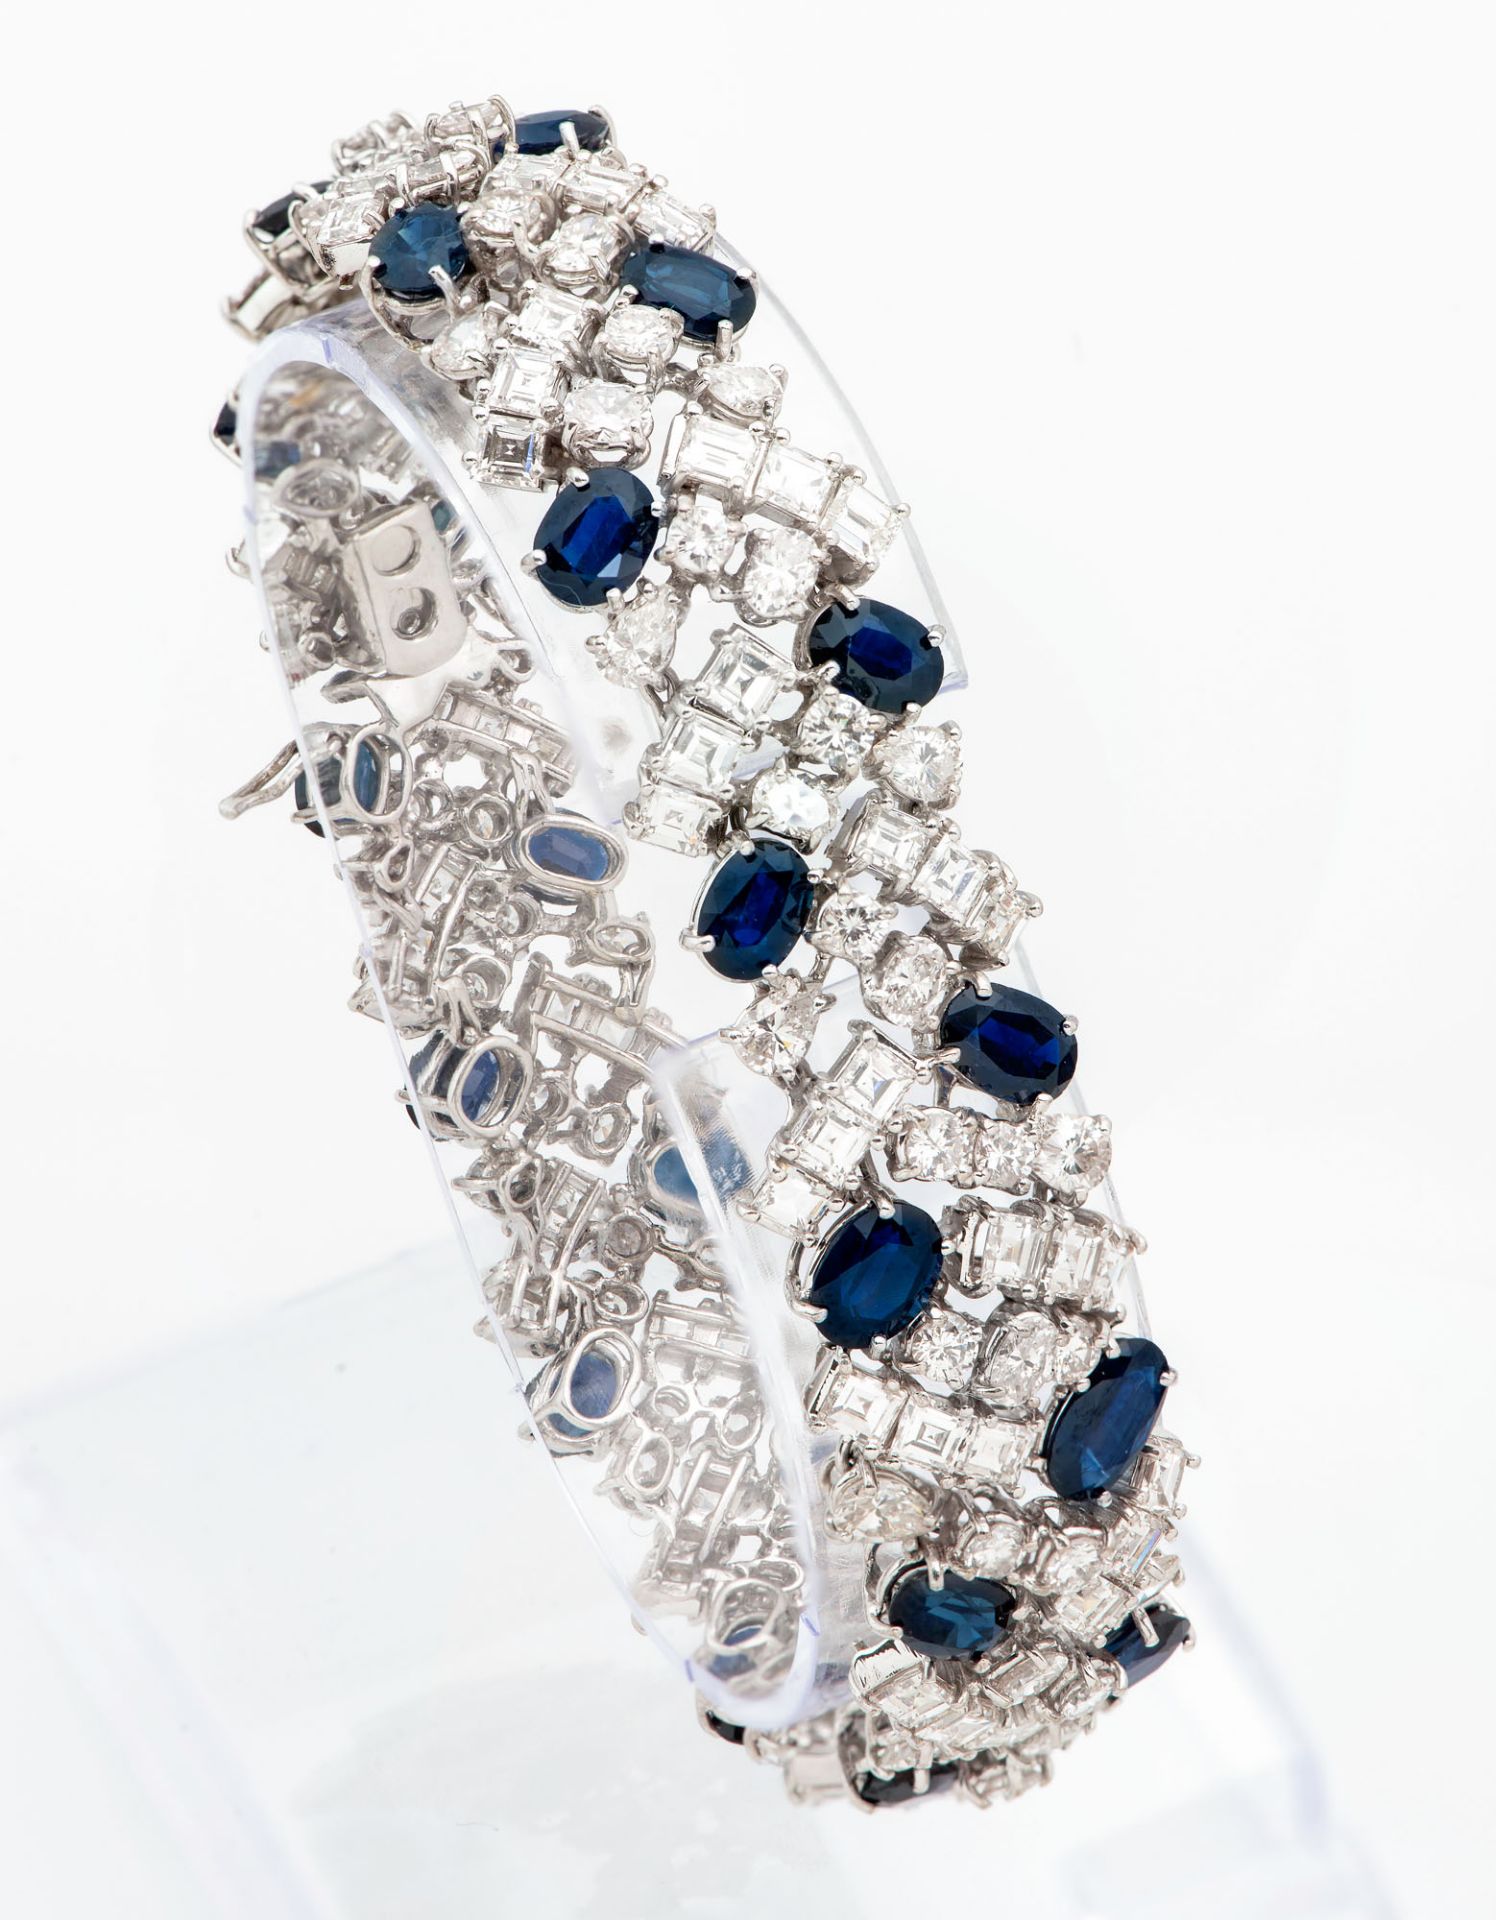 An Exquisite 18K White Gold Diamond and Sapphire Bracelet